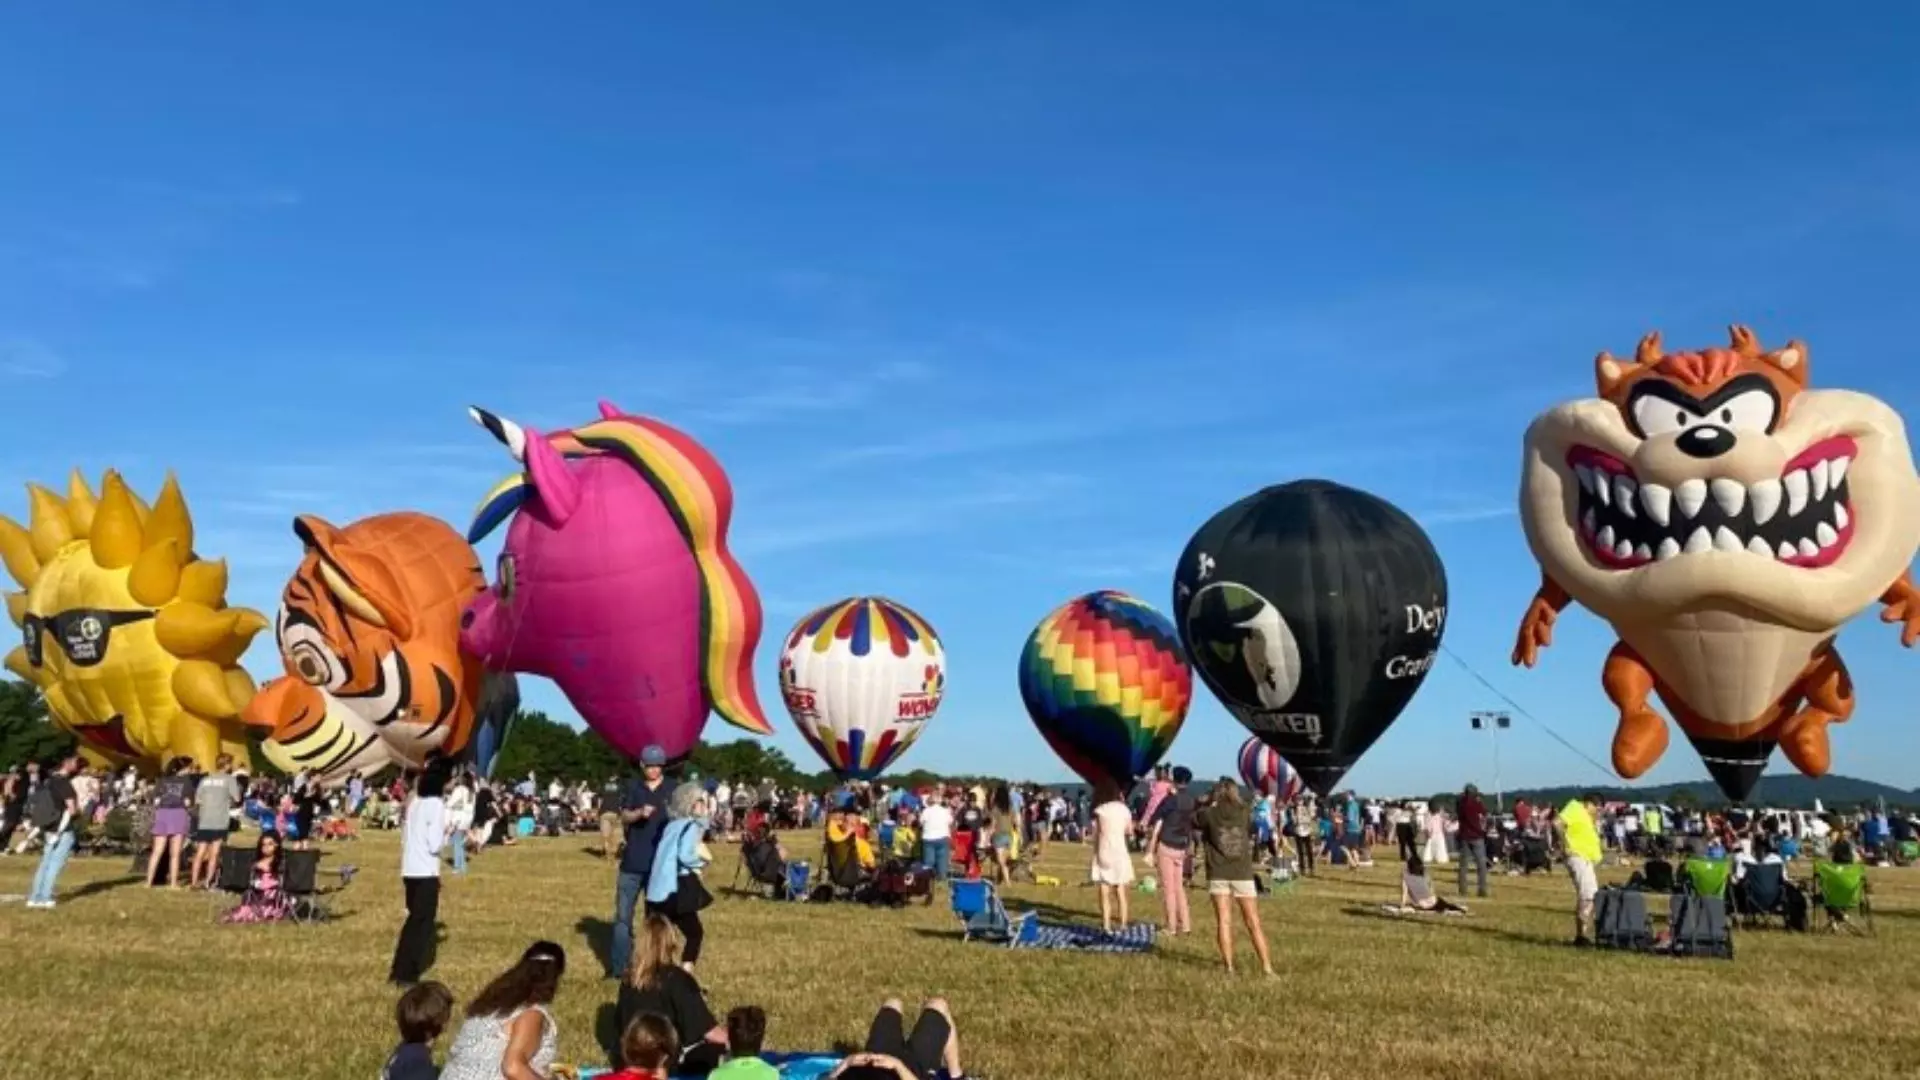 PHOTOS: See pictures from the NJ Lottery Festival of Ballooning